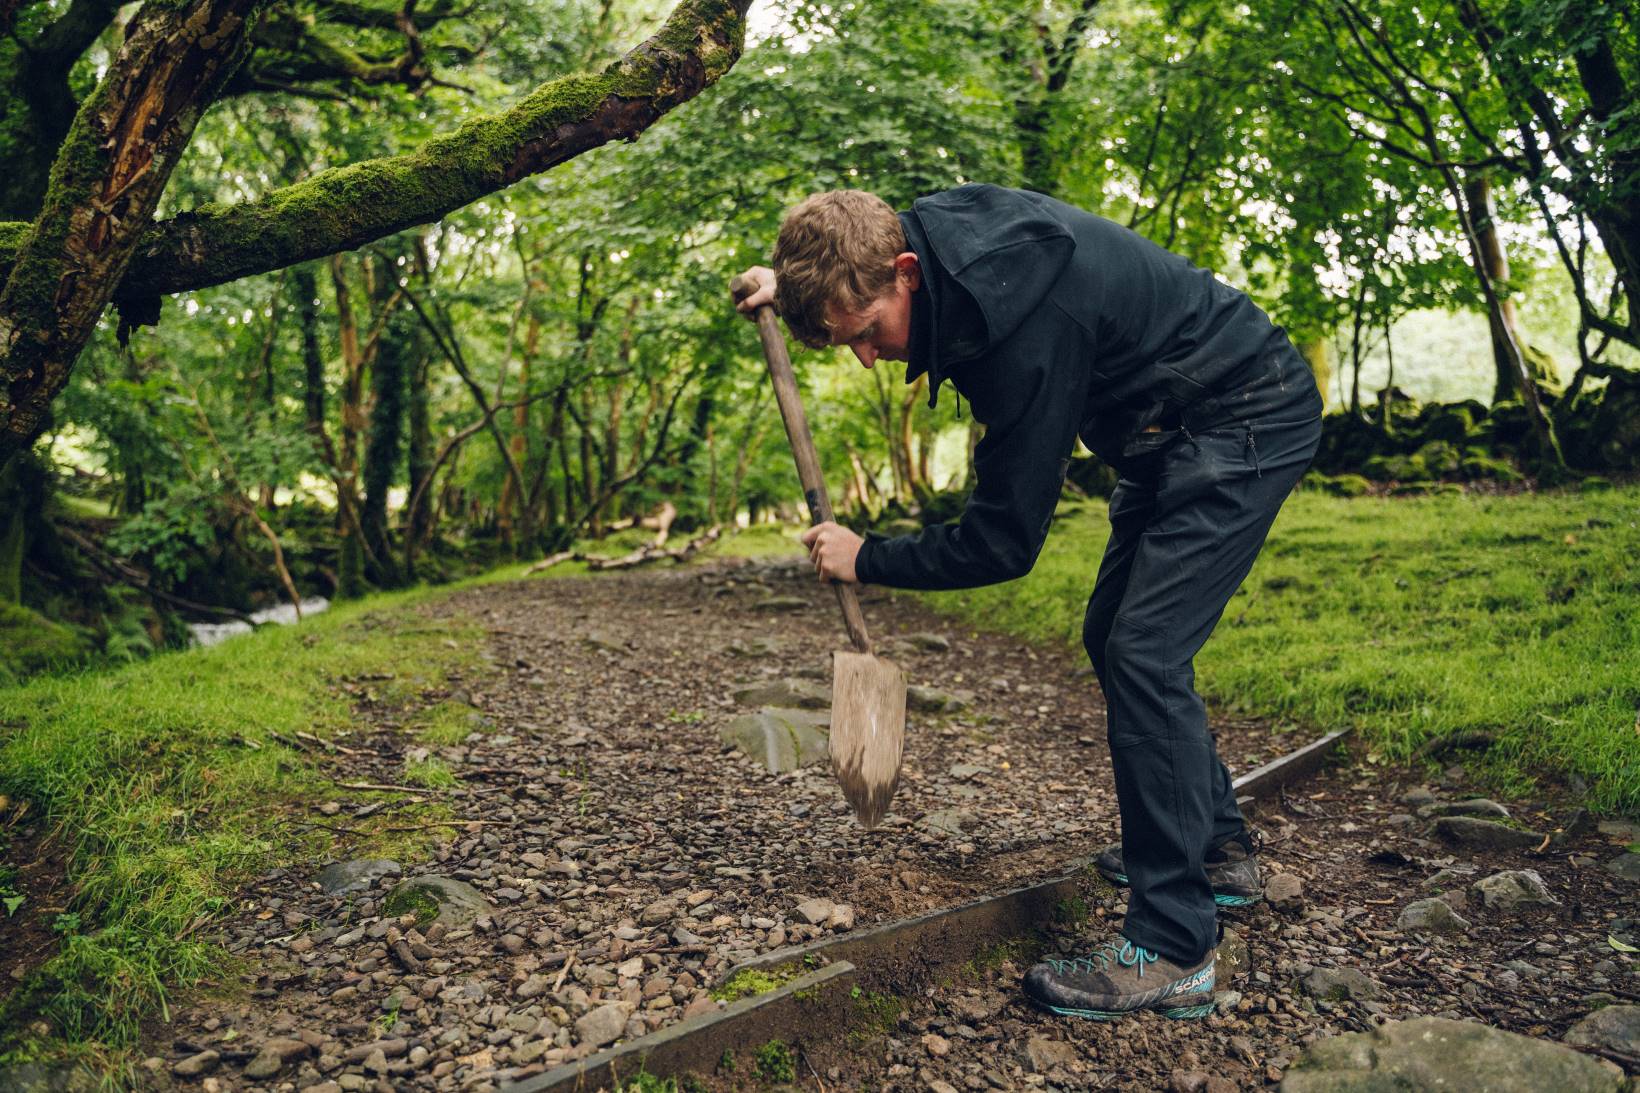 A National Park Authority warden uses a spade to work an a woodland footpath.